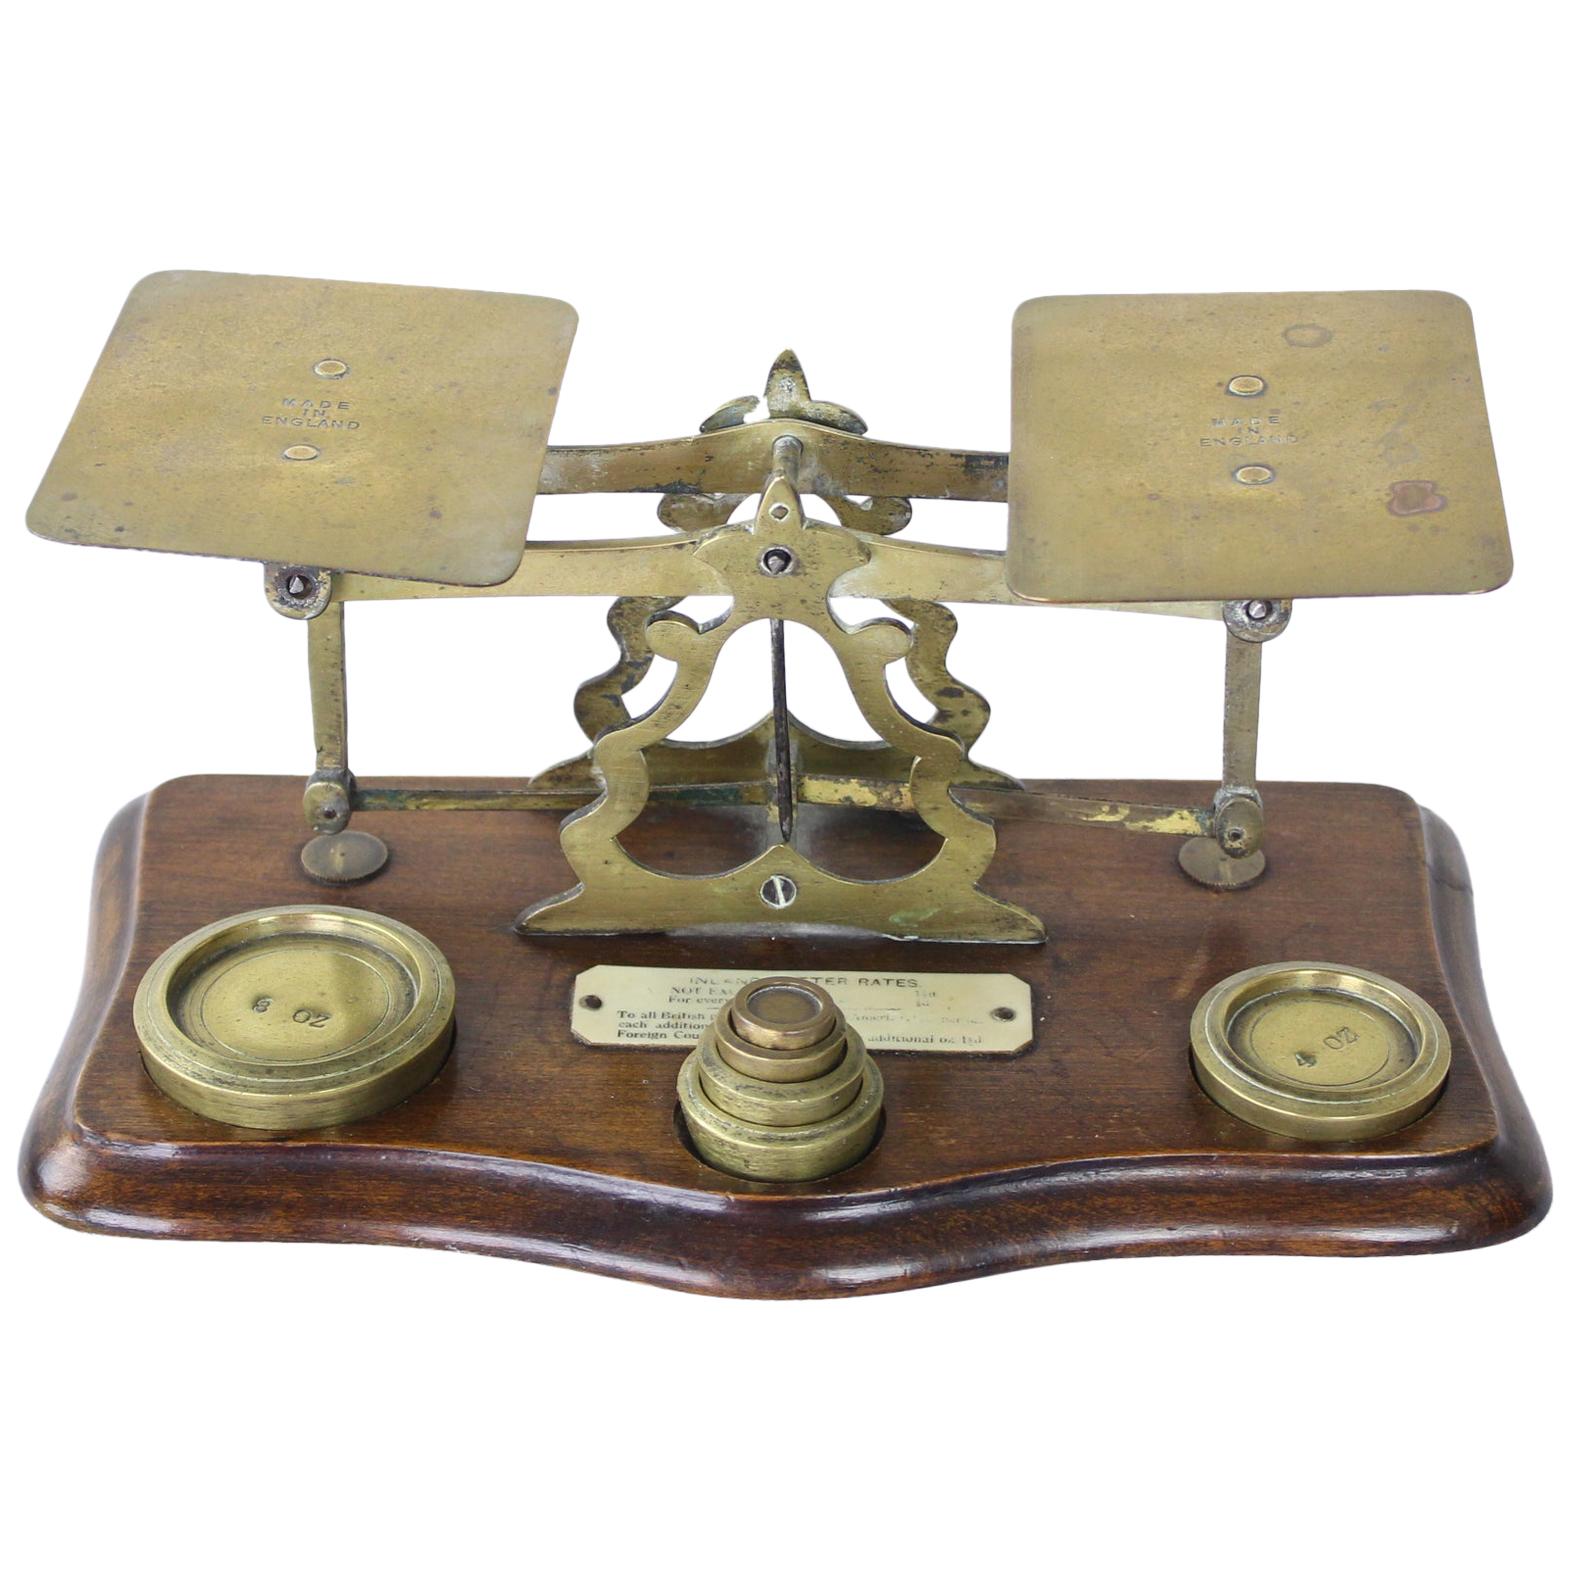 Antique English Wood and Brass Postal Scale